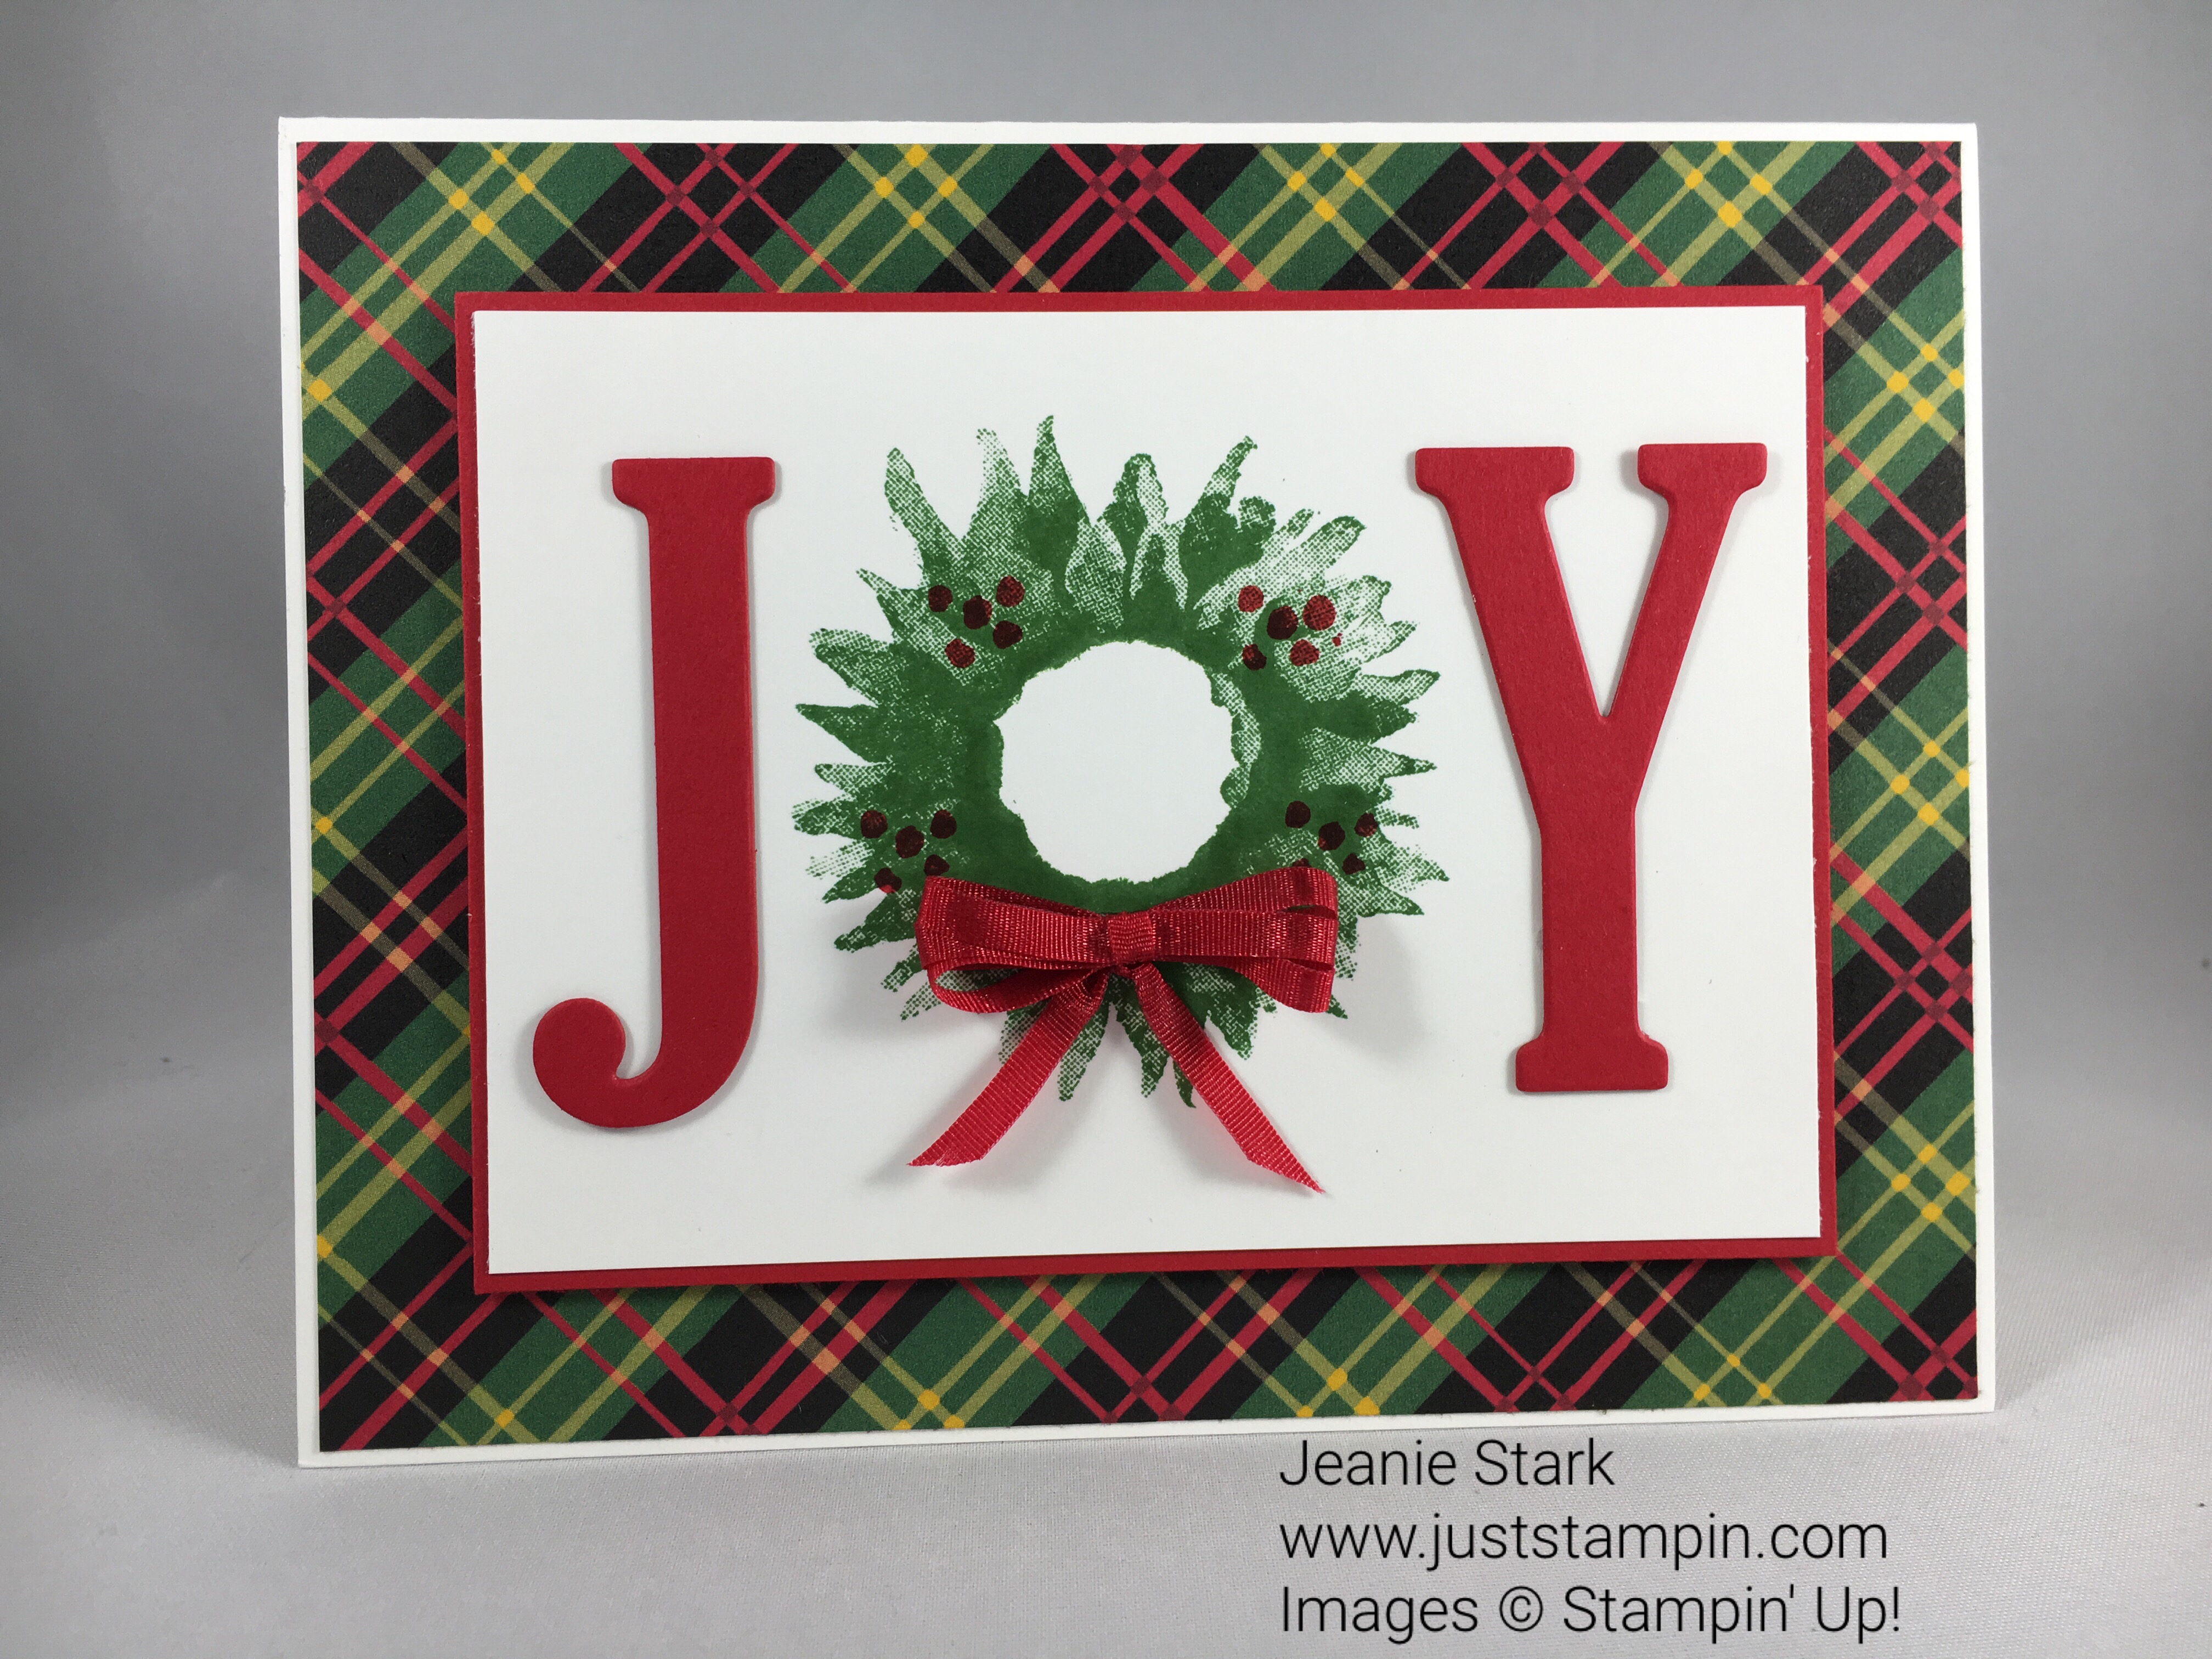 Stampin Up Painted Harvest Christmas Joy Card Idea - Jeanie Stark StampinUp For inspiration and supplies visit www.juststampin.com